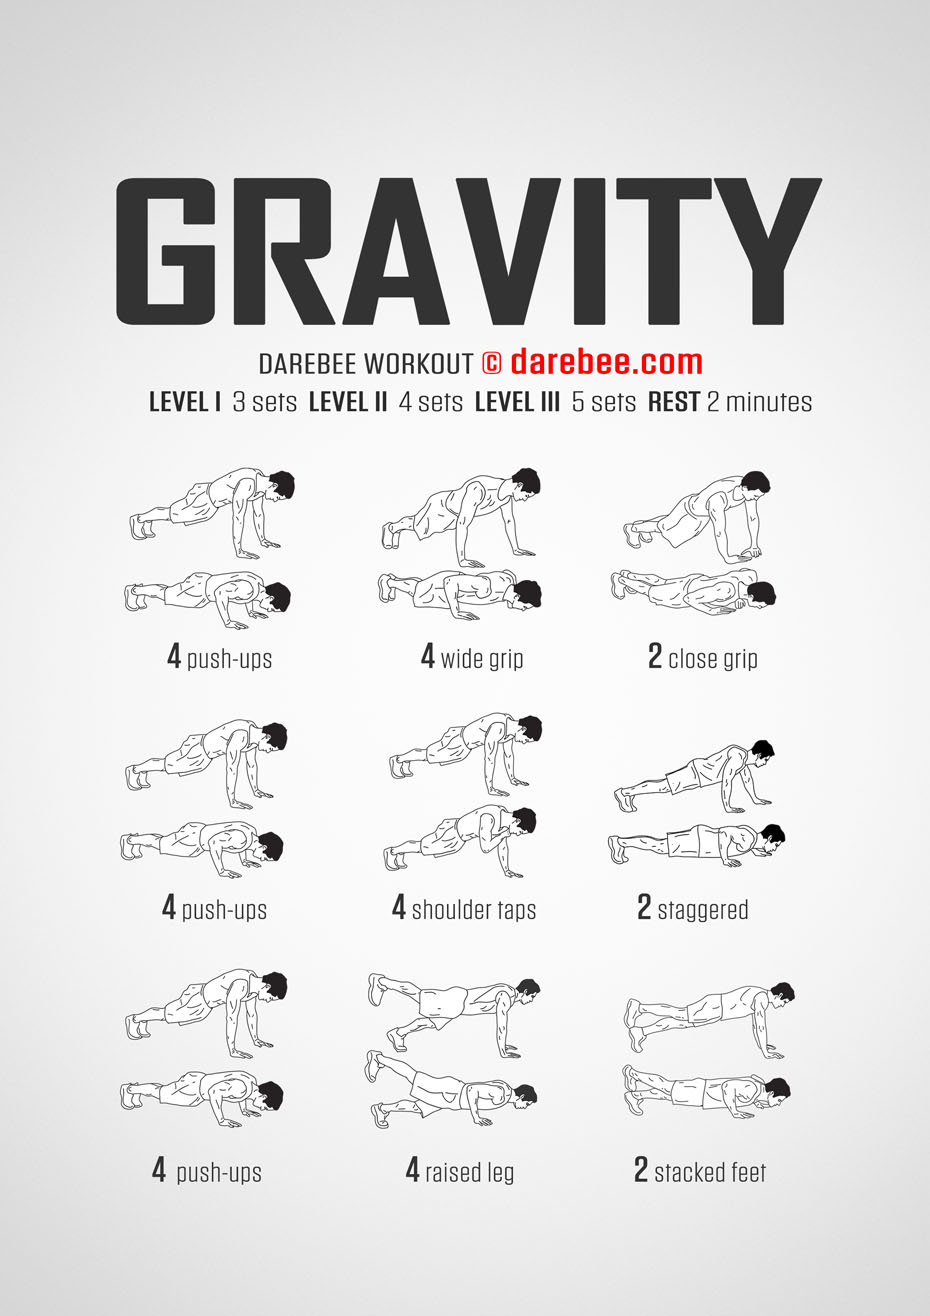  Chest workout darebee for Women